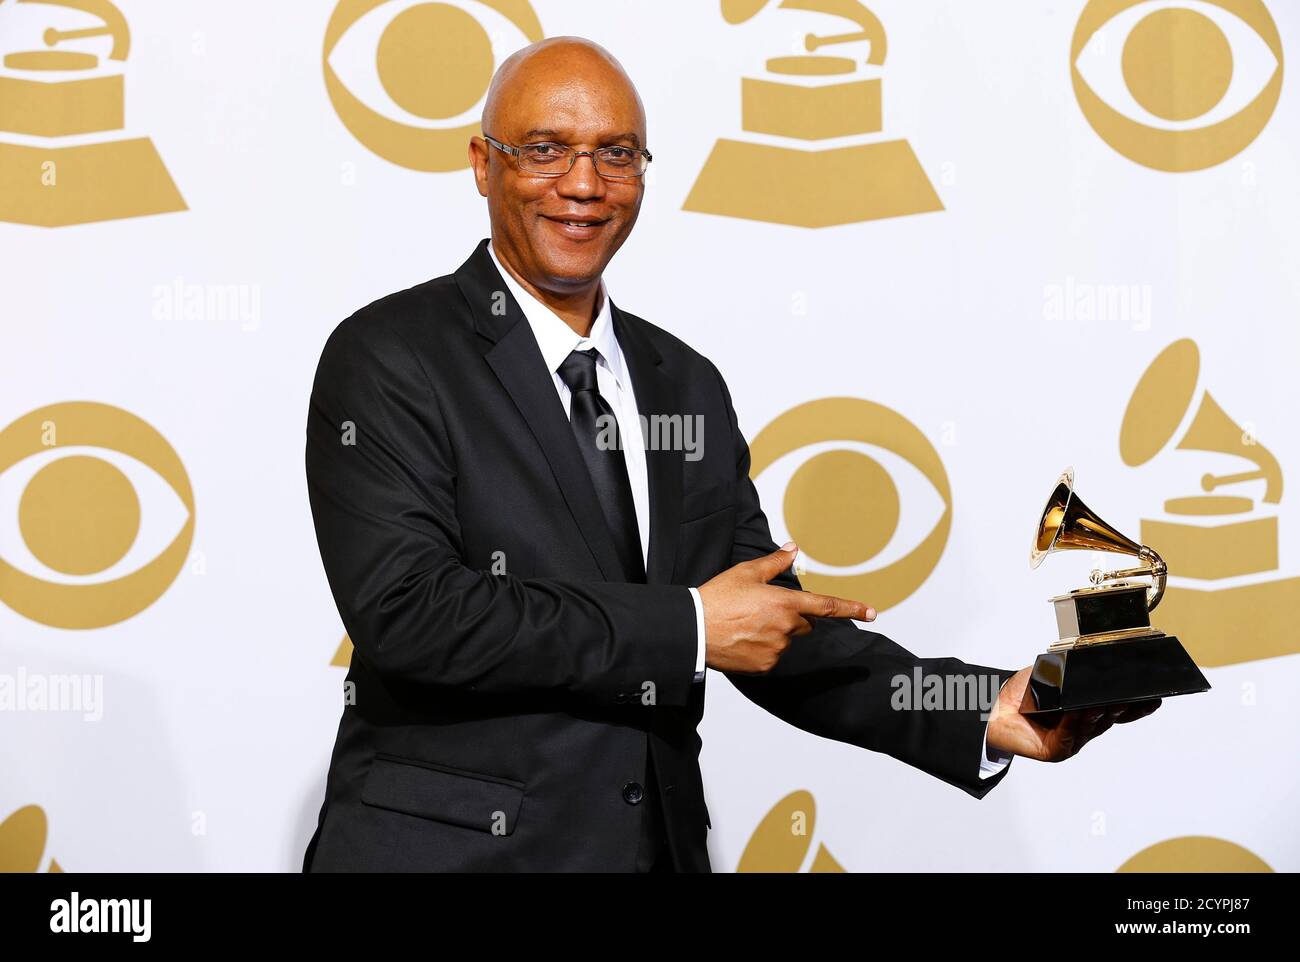 Billy Childs poses with his award for best arraignment, instrument and vocals for 'New York Tendaberry' backstage at the 57th annual Grammy Awards in Los Angeles, California February 8, 2015.   REUTERS/Mike Blake (UNITED STATES  - Tags: ENTERTAINMENT)  (GRAMMYS-BACKSTAGE) Stock Photo